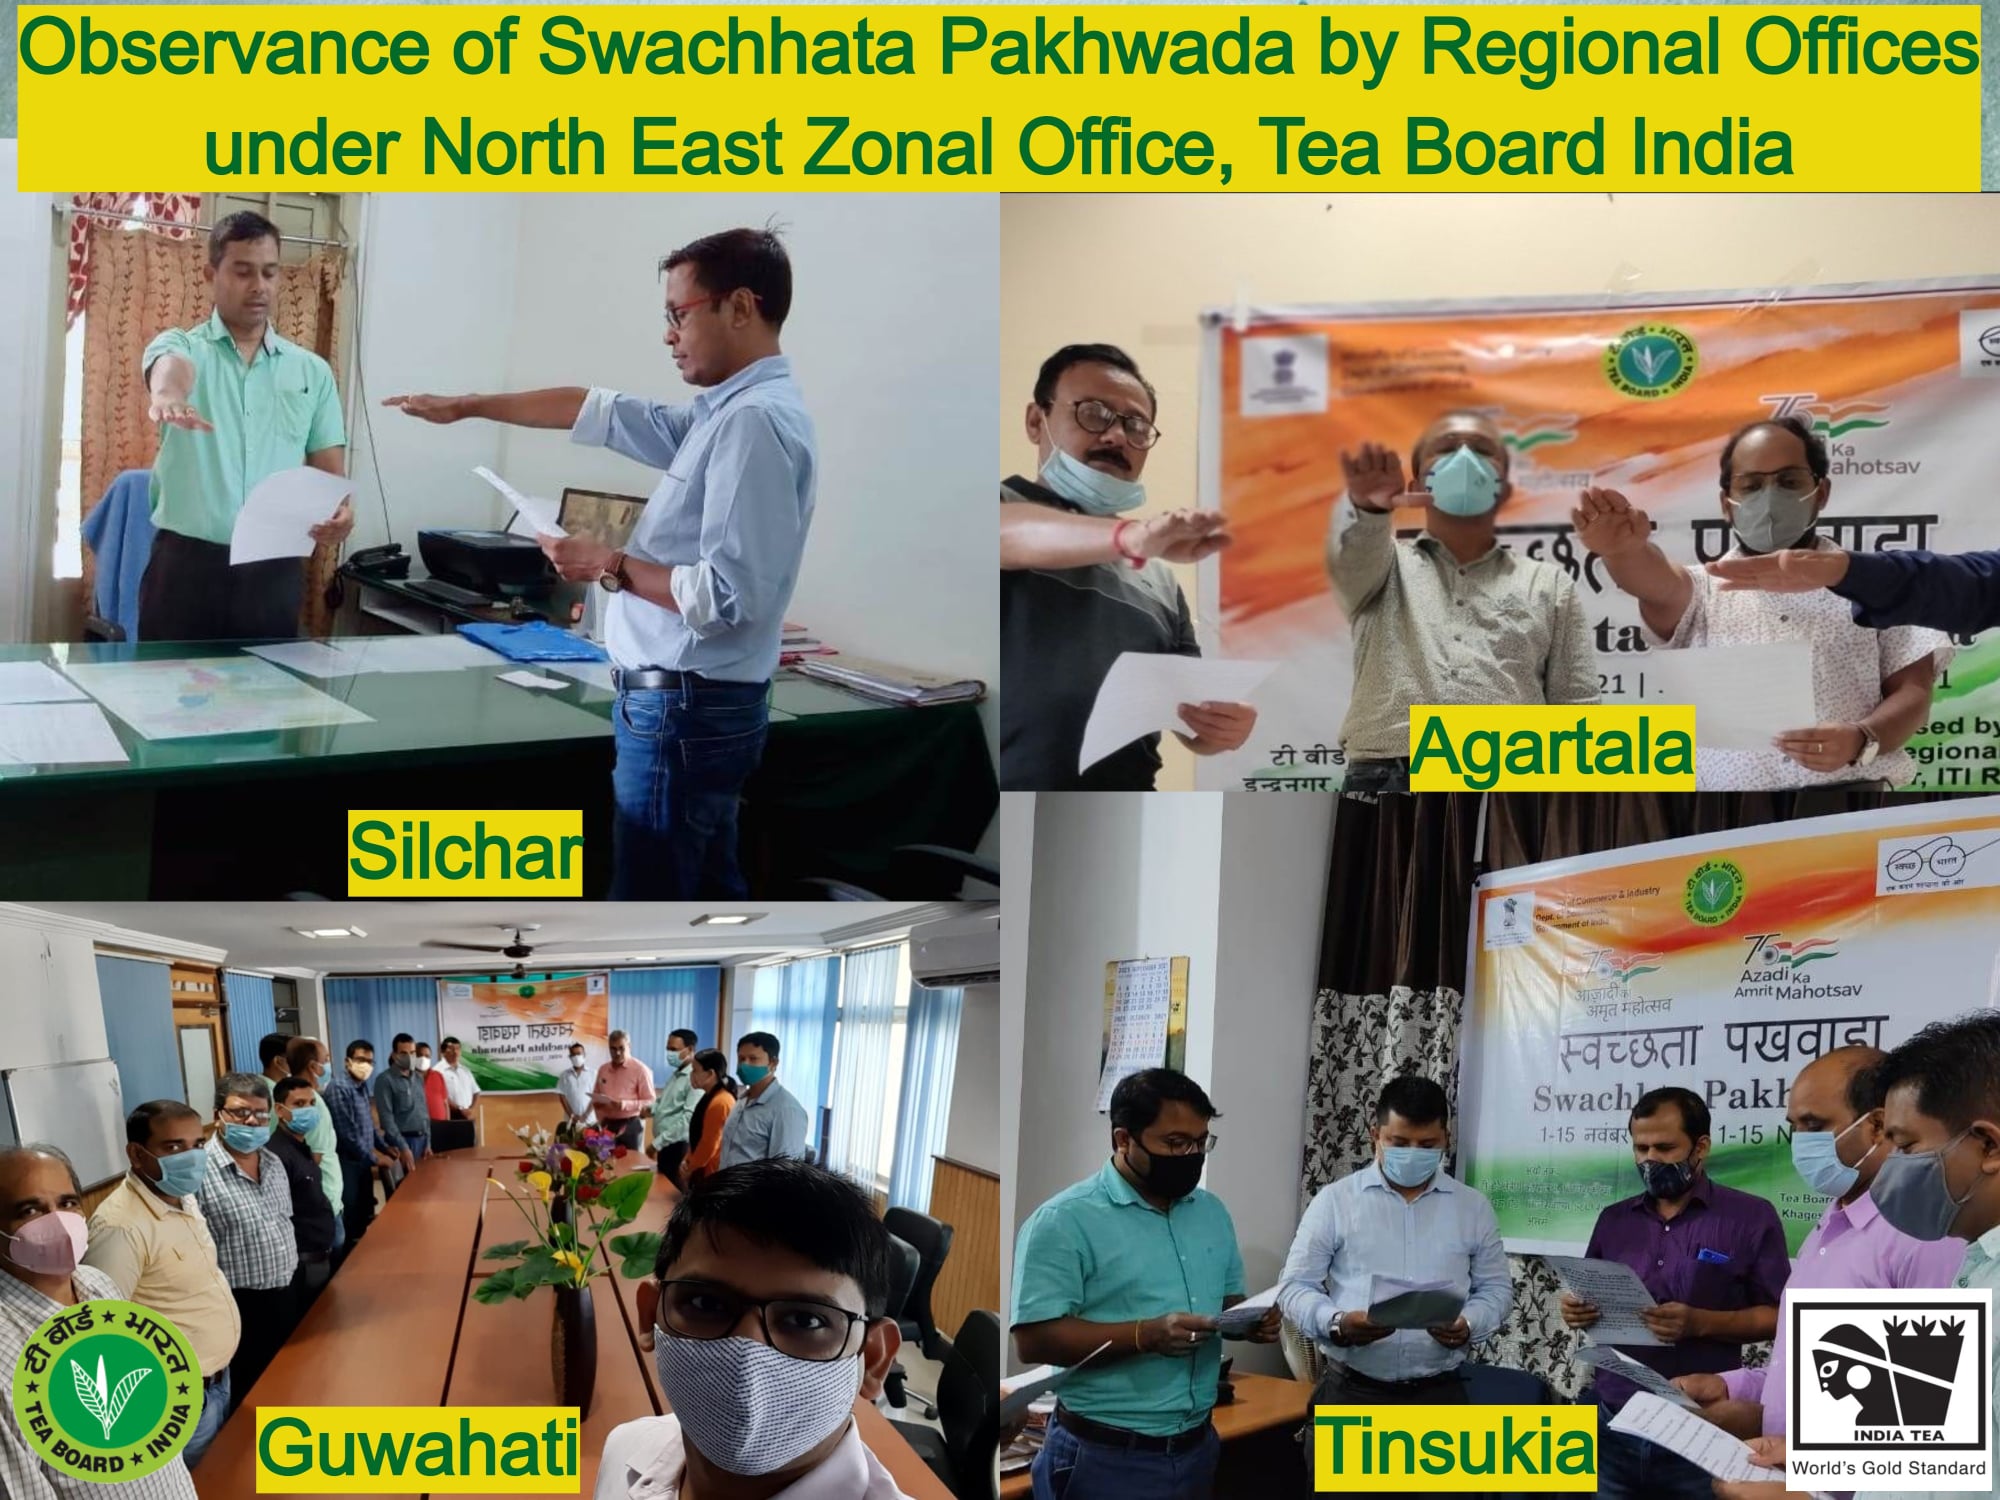 Observance of Swachhata Pakhwada by Regional Offices under North East Zonal Office, Tea Board India, November 2021